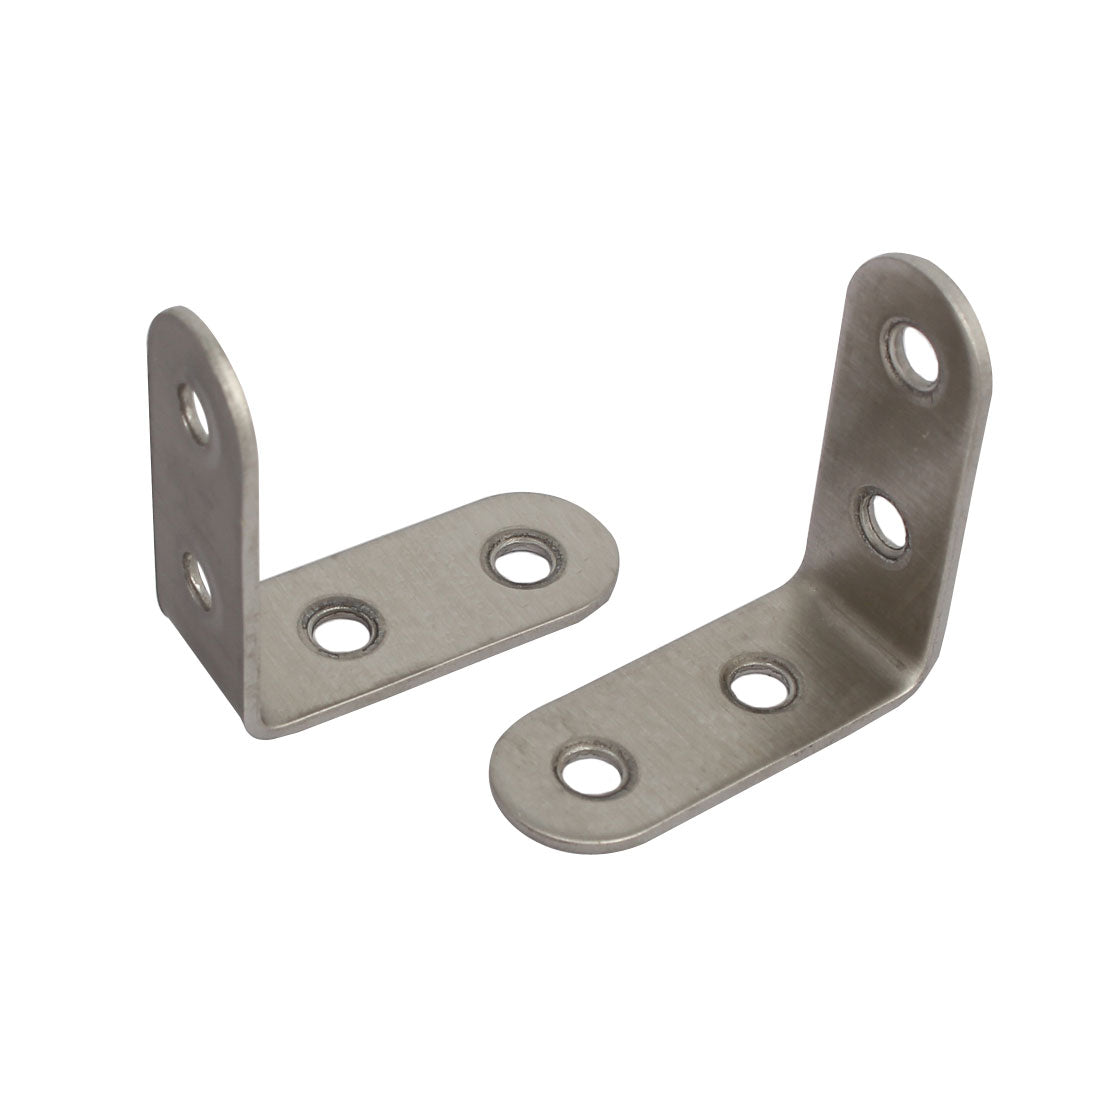 uxcell Uxcell 40mmx16mmx40mm L Shape Right Angle Stainless Steel Corner Bracket Brace 40pcs